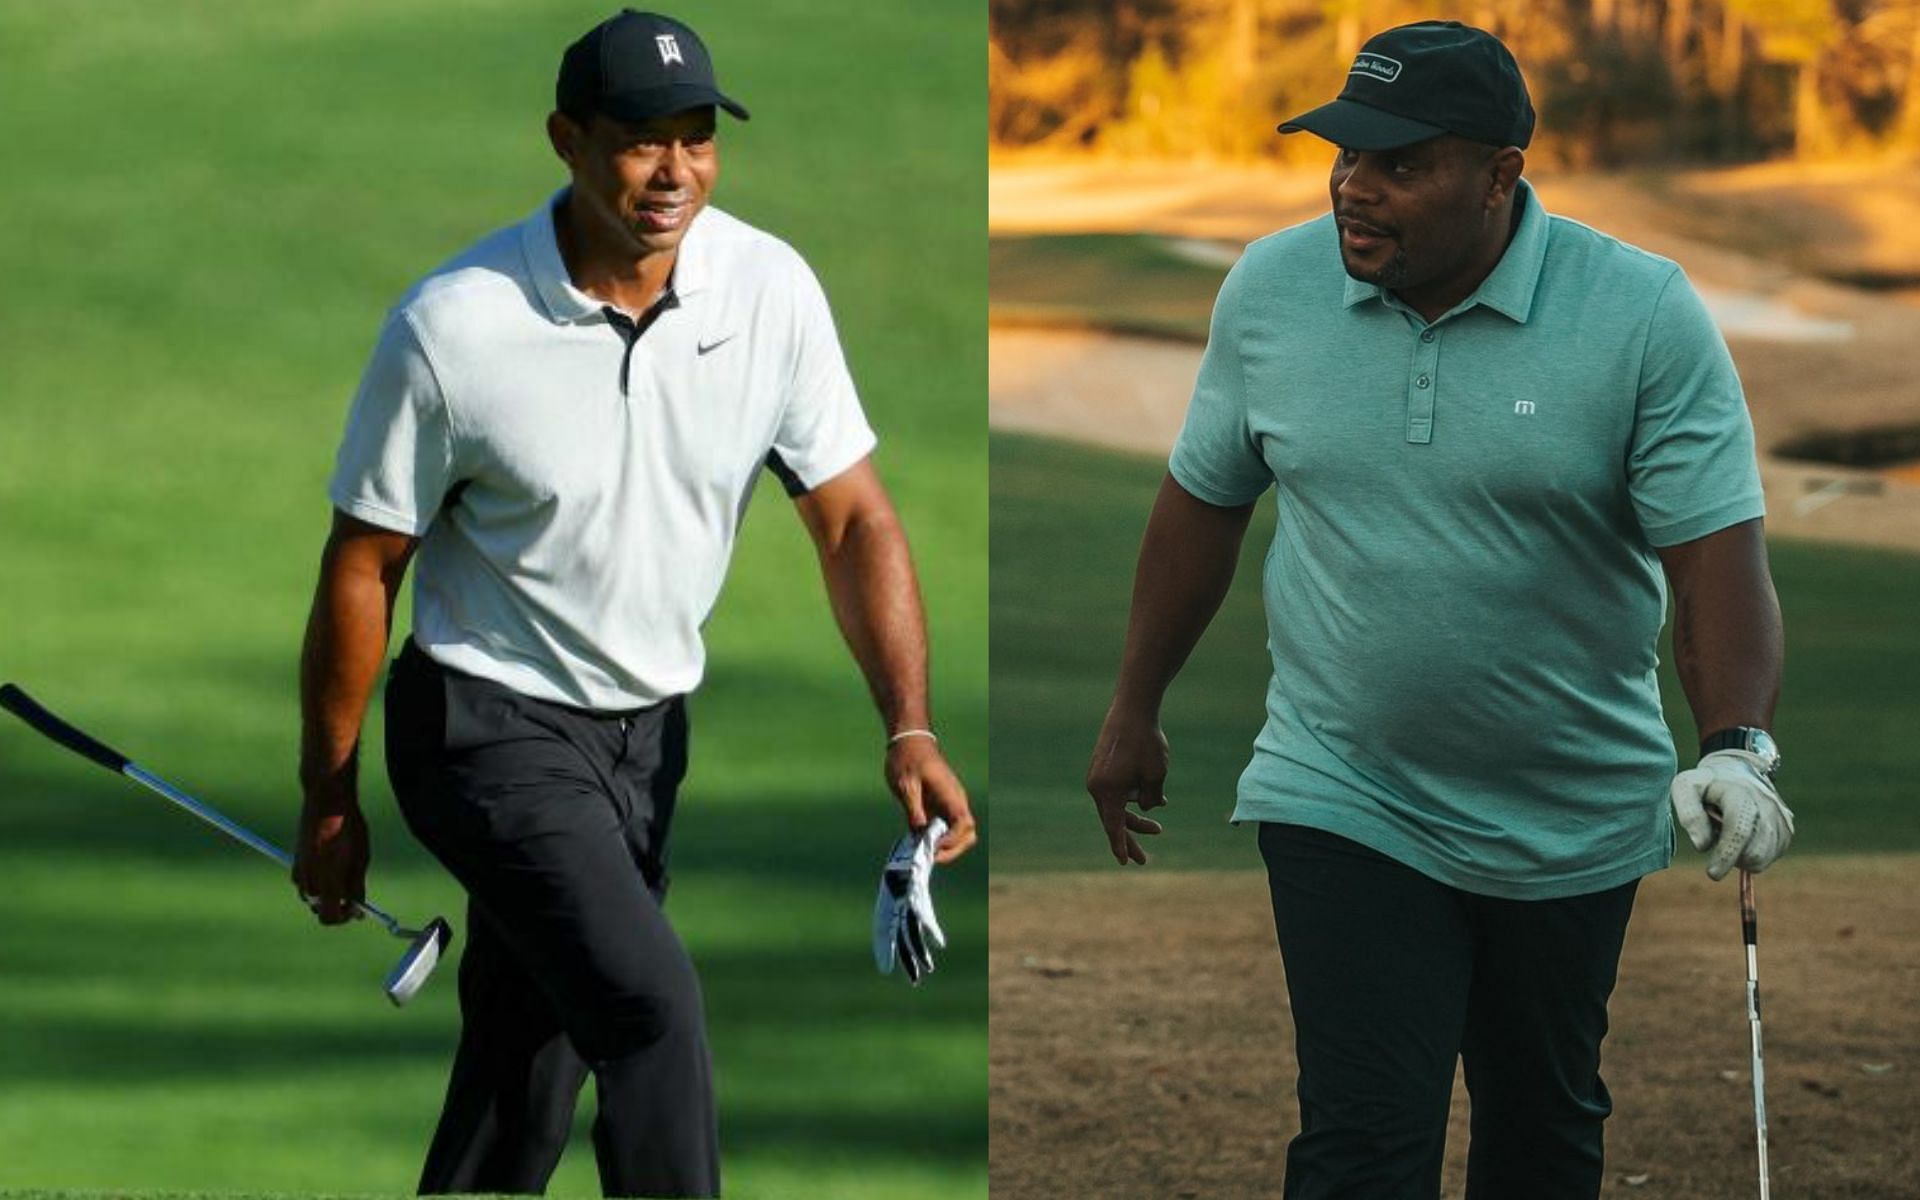 Tiger Woods (left) and Daniel Cormier (right). [via Golf Digest and X @ABREG_1]